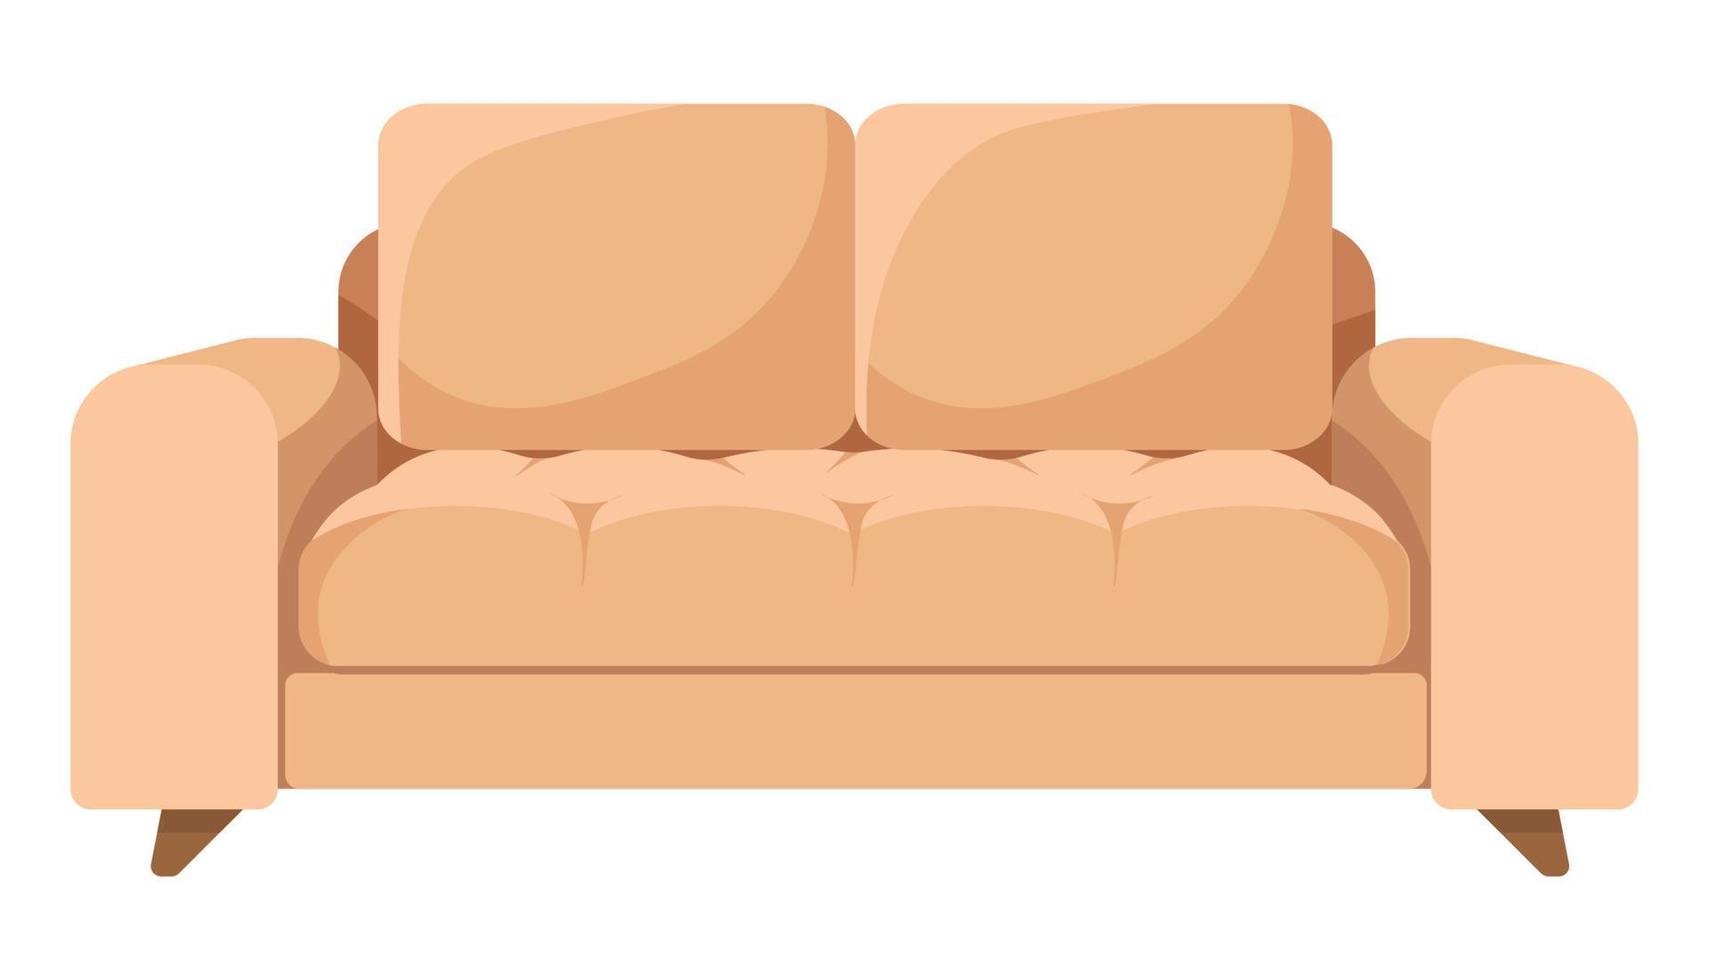 Modern sofa for home or office interior decoration vector